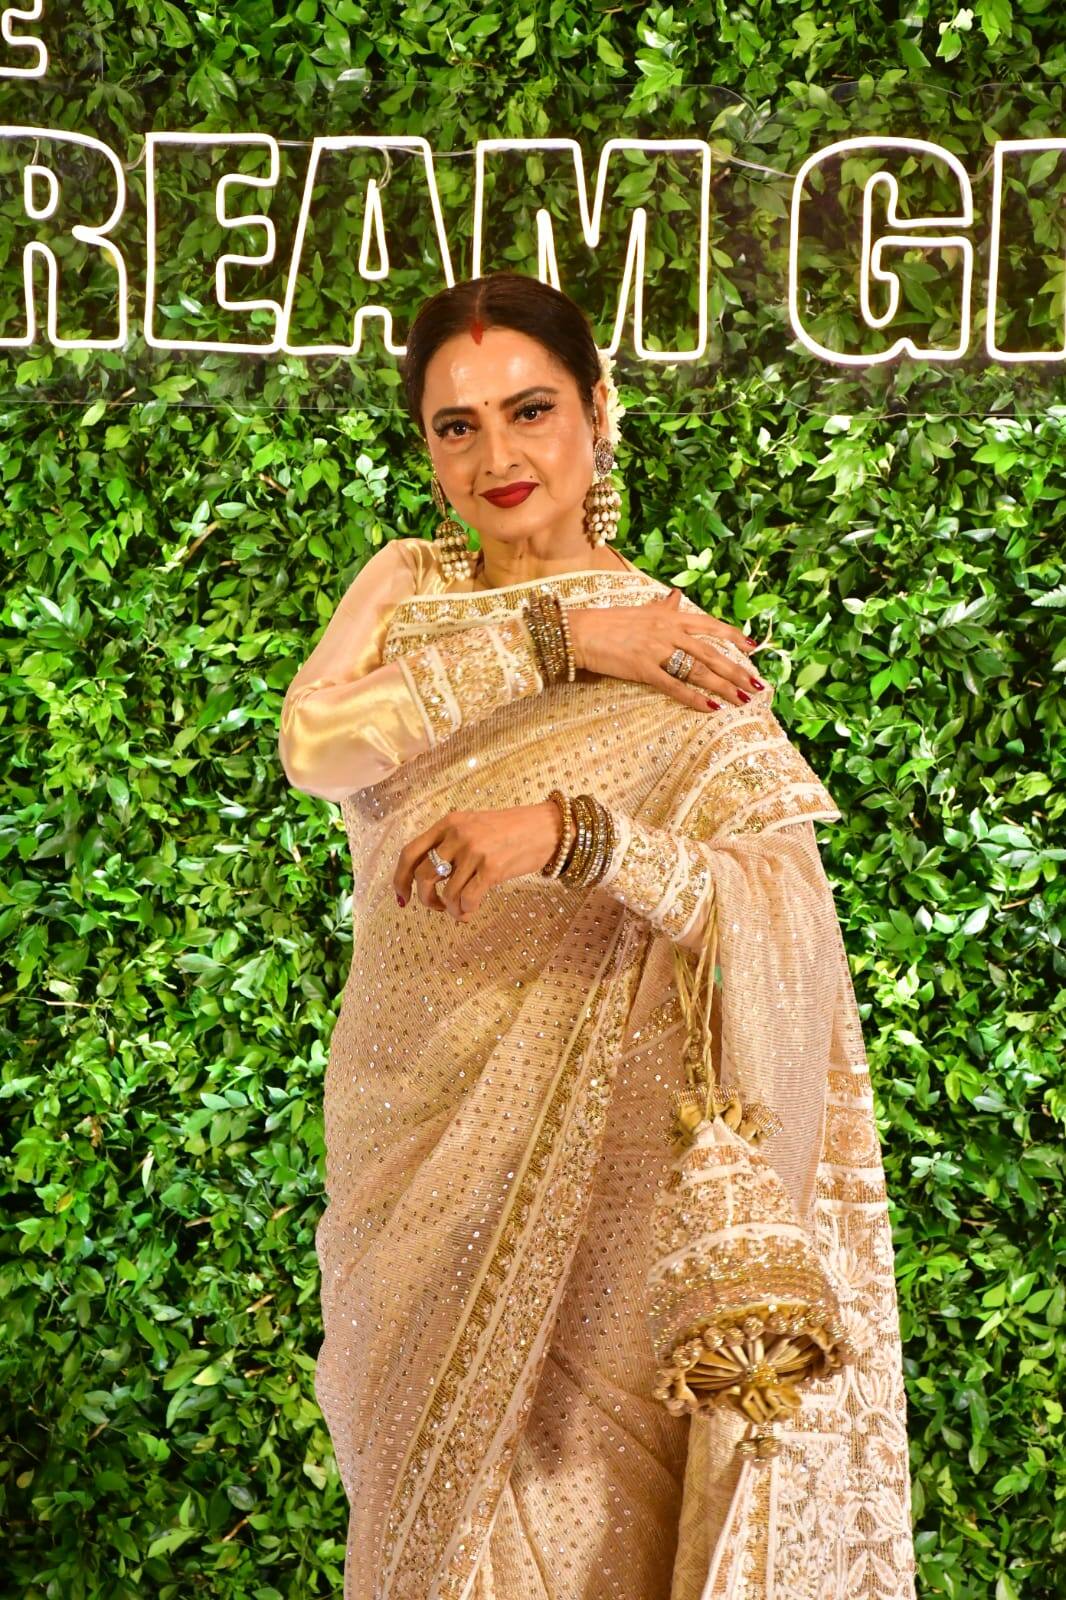 Bollywood actress Rekha experiences hard times in life and film career srb